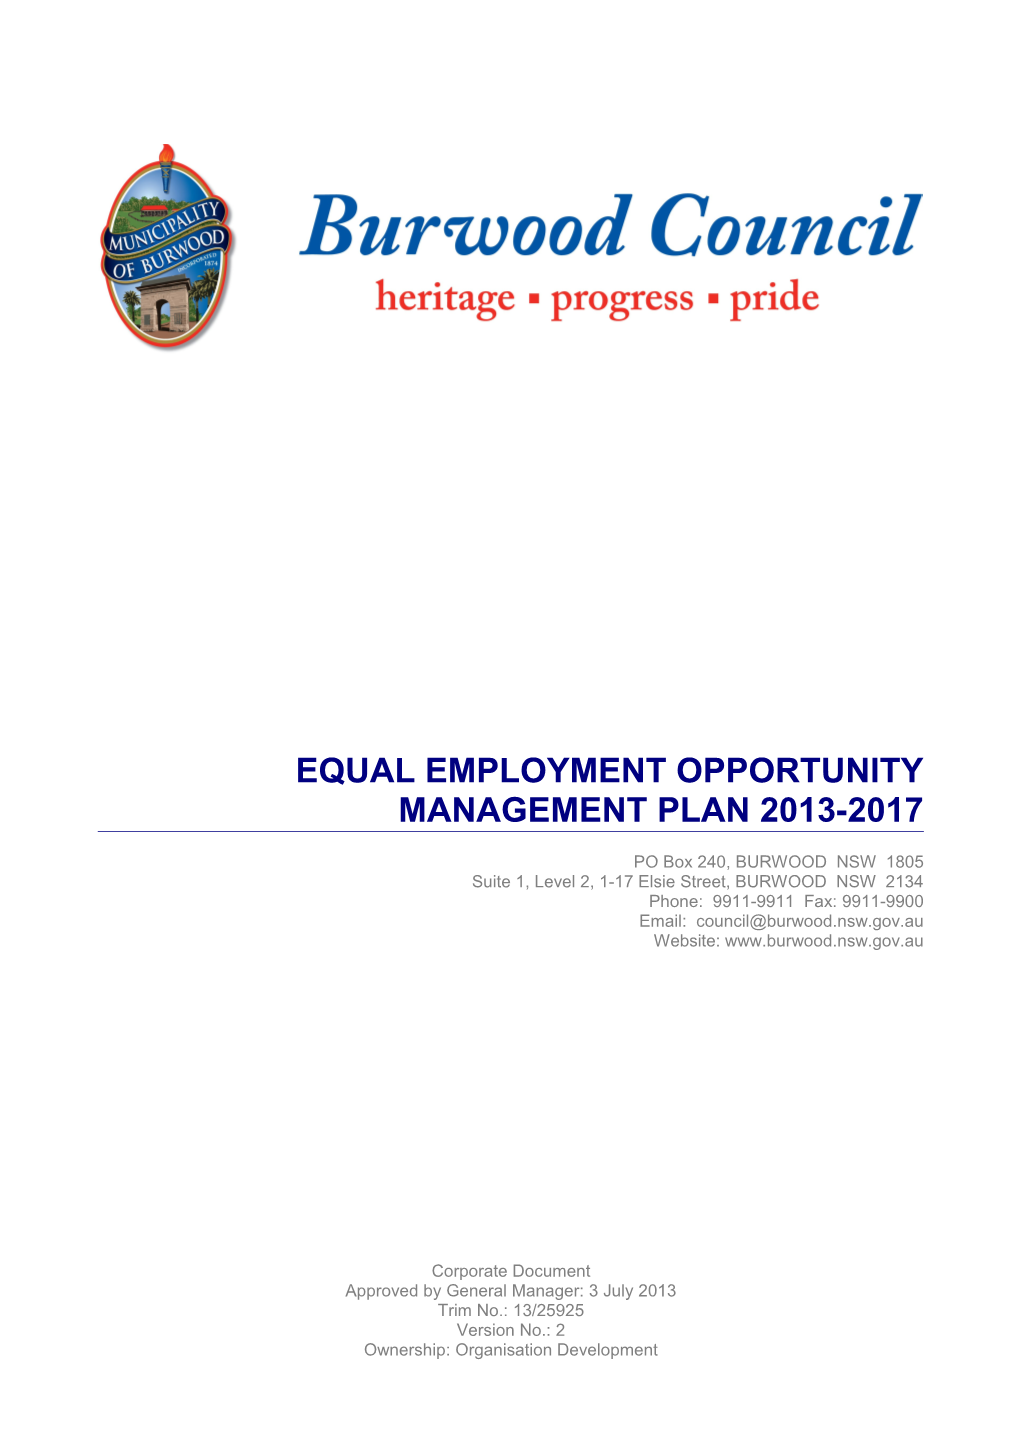 Equal Employment Opportunity Management Plan 2013-2017